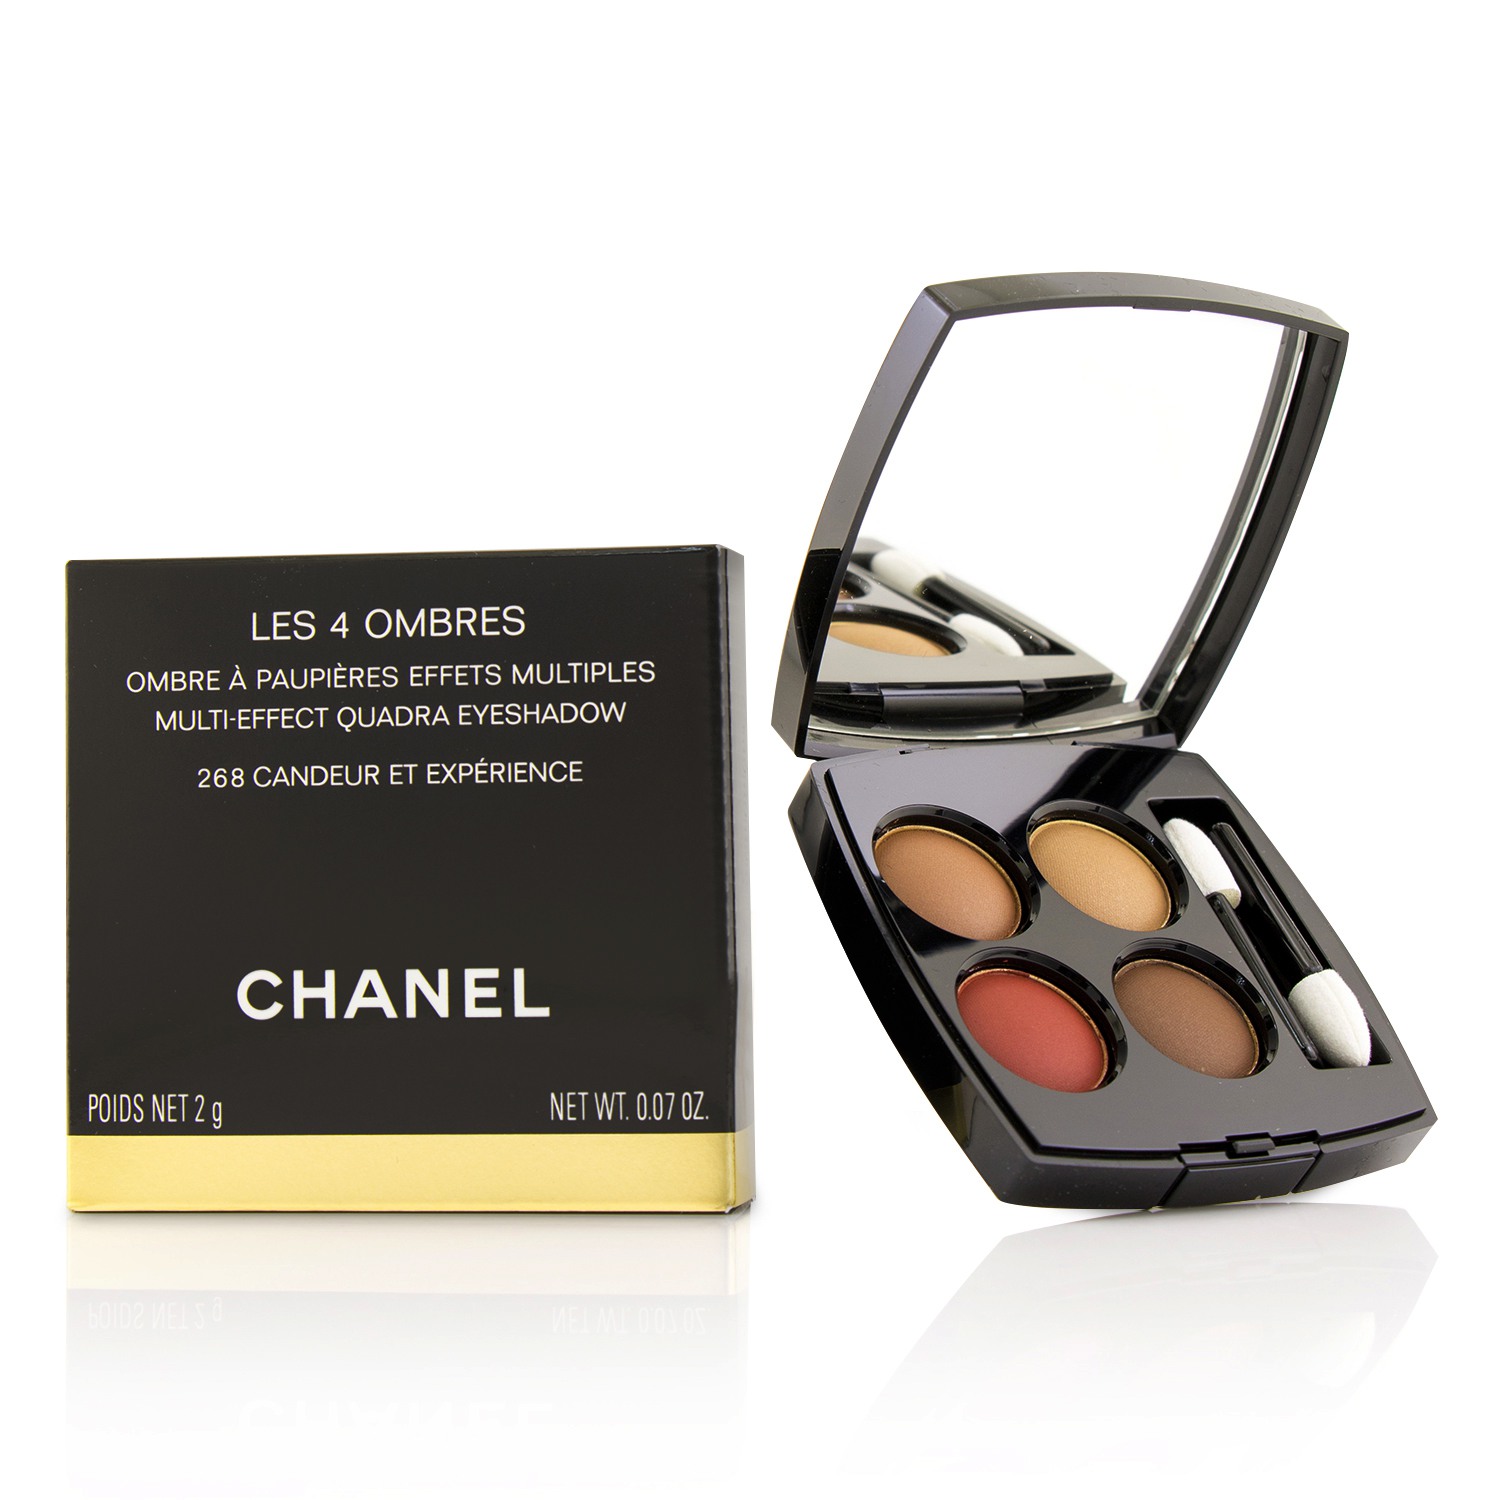 Chanel Brightening Collection Eyeshadow Palette Convinced Me to